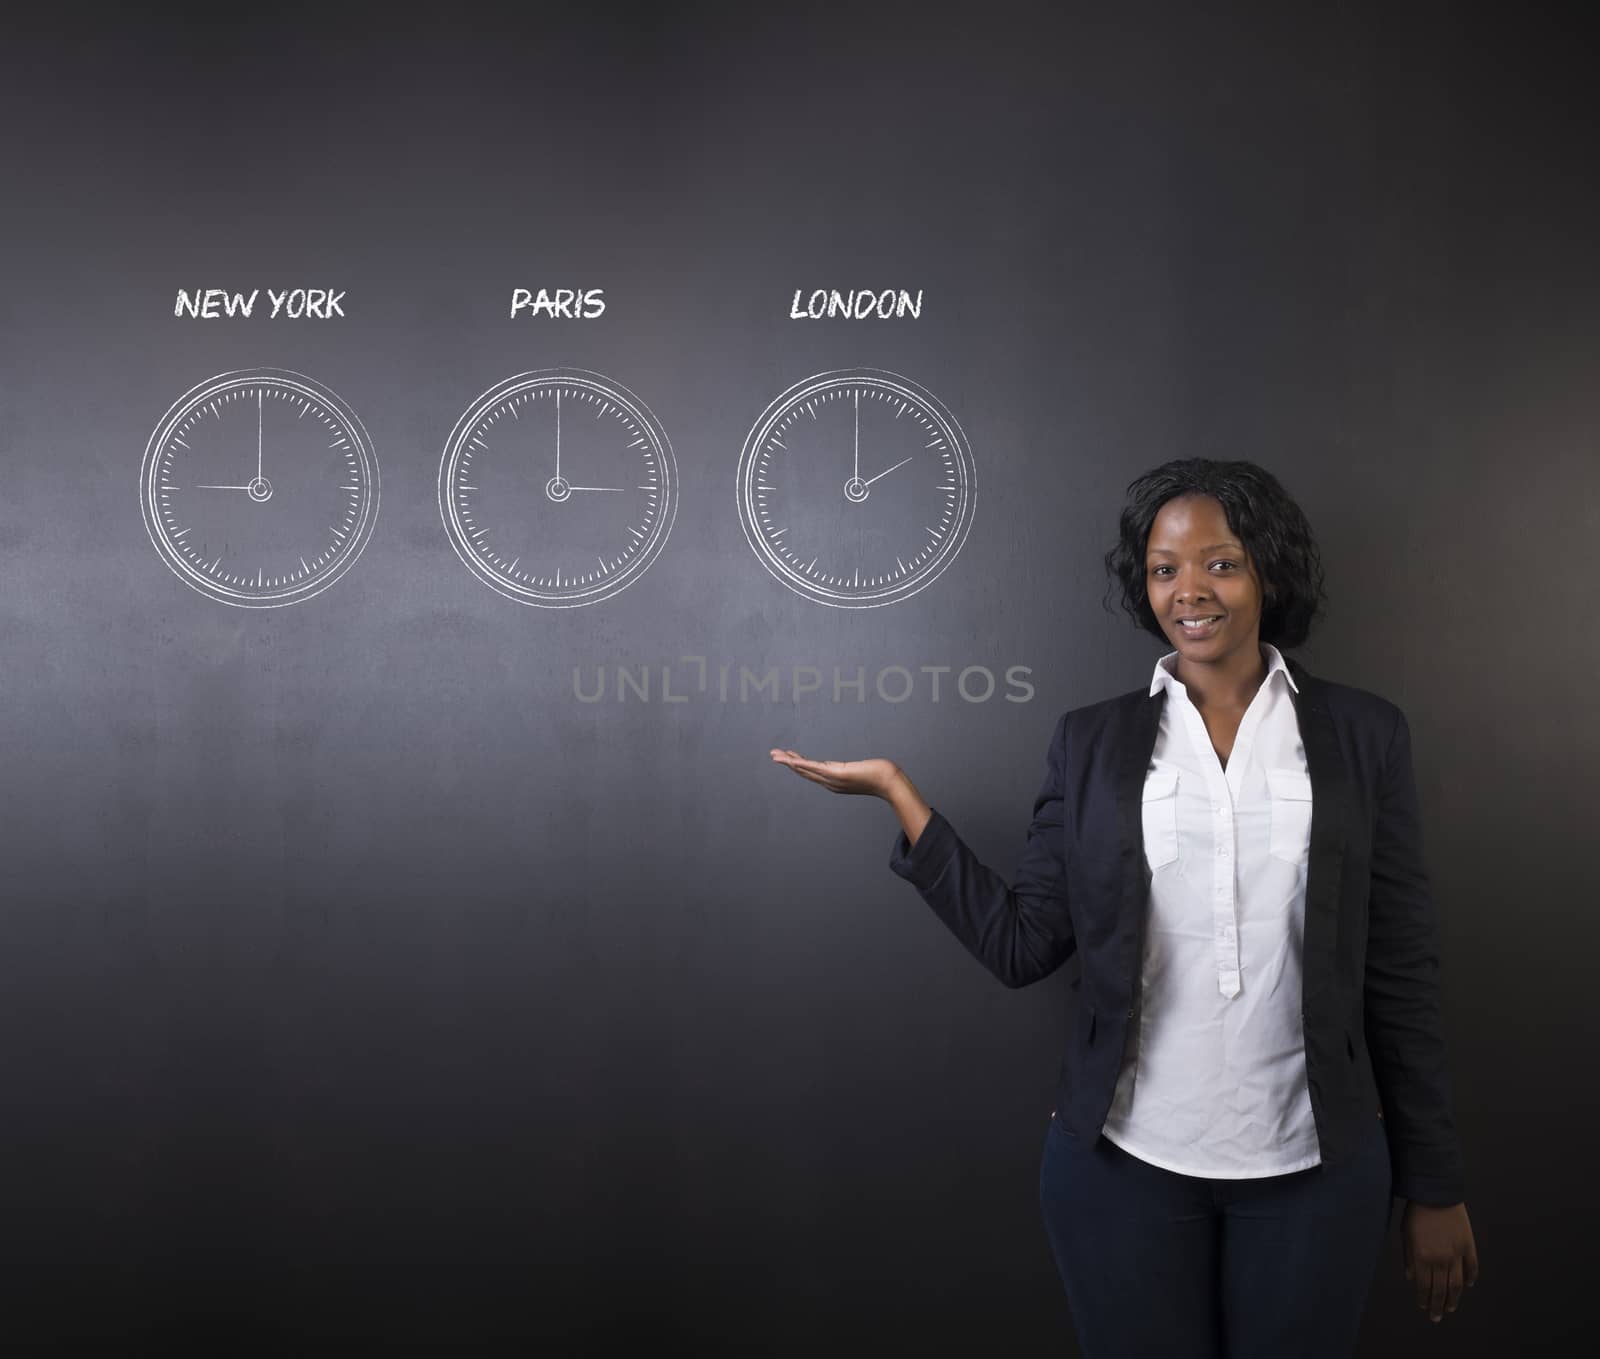 South African or African American woman teacher or student holding hand out displaying the  New York, Paris and London chalk time zone clocks on a blackboard background